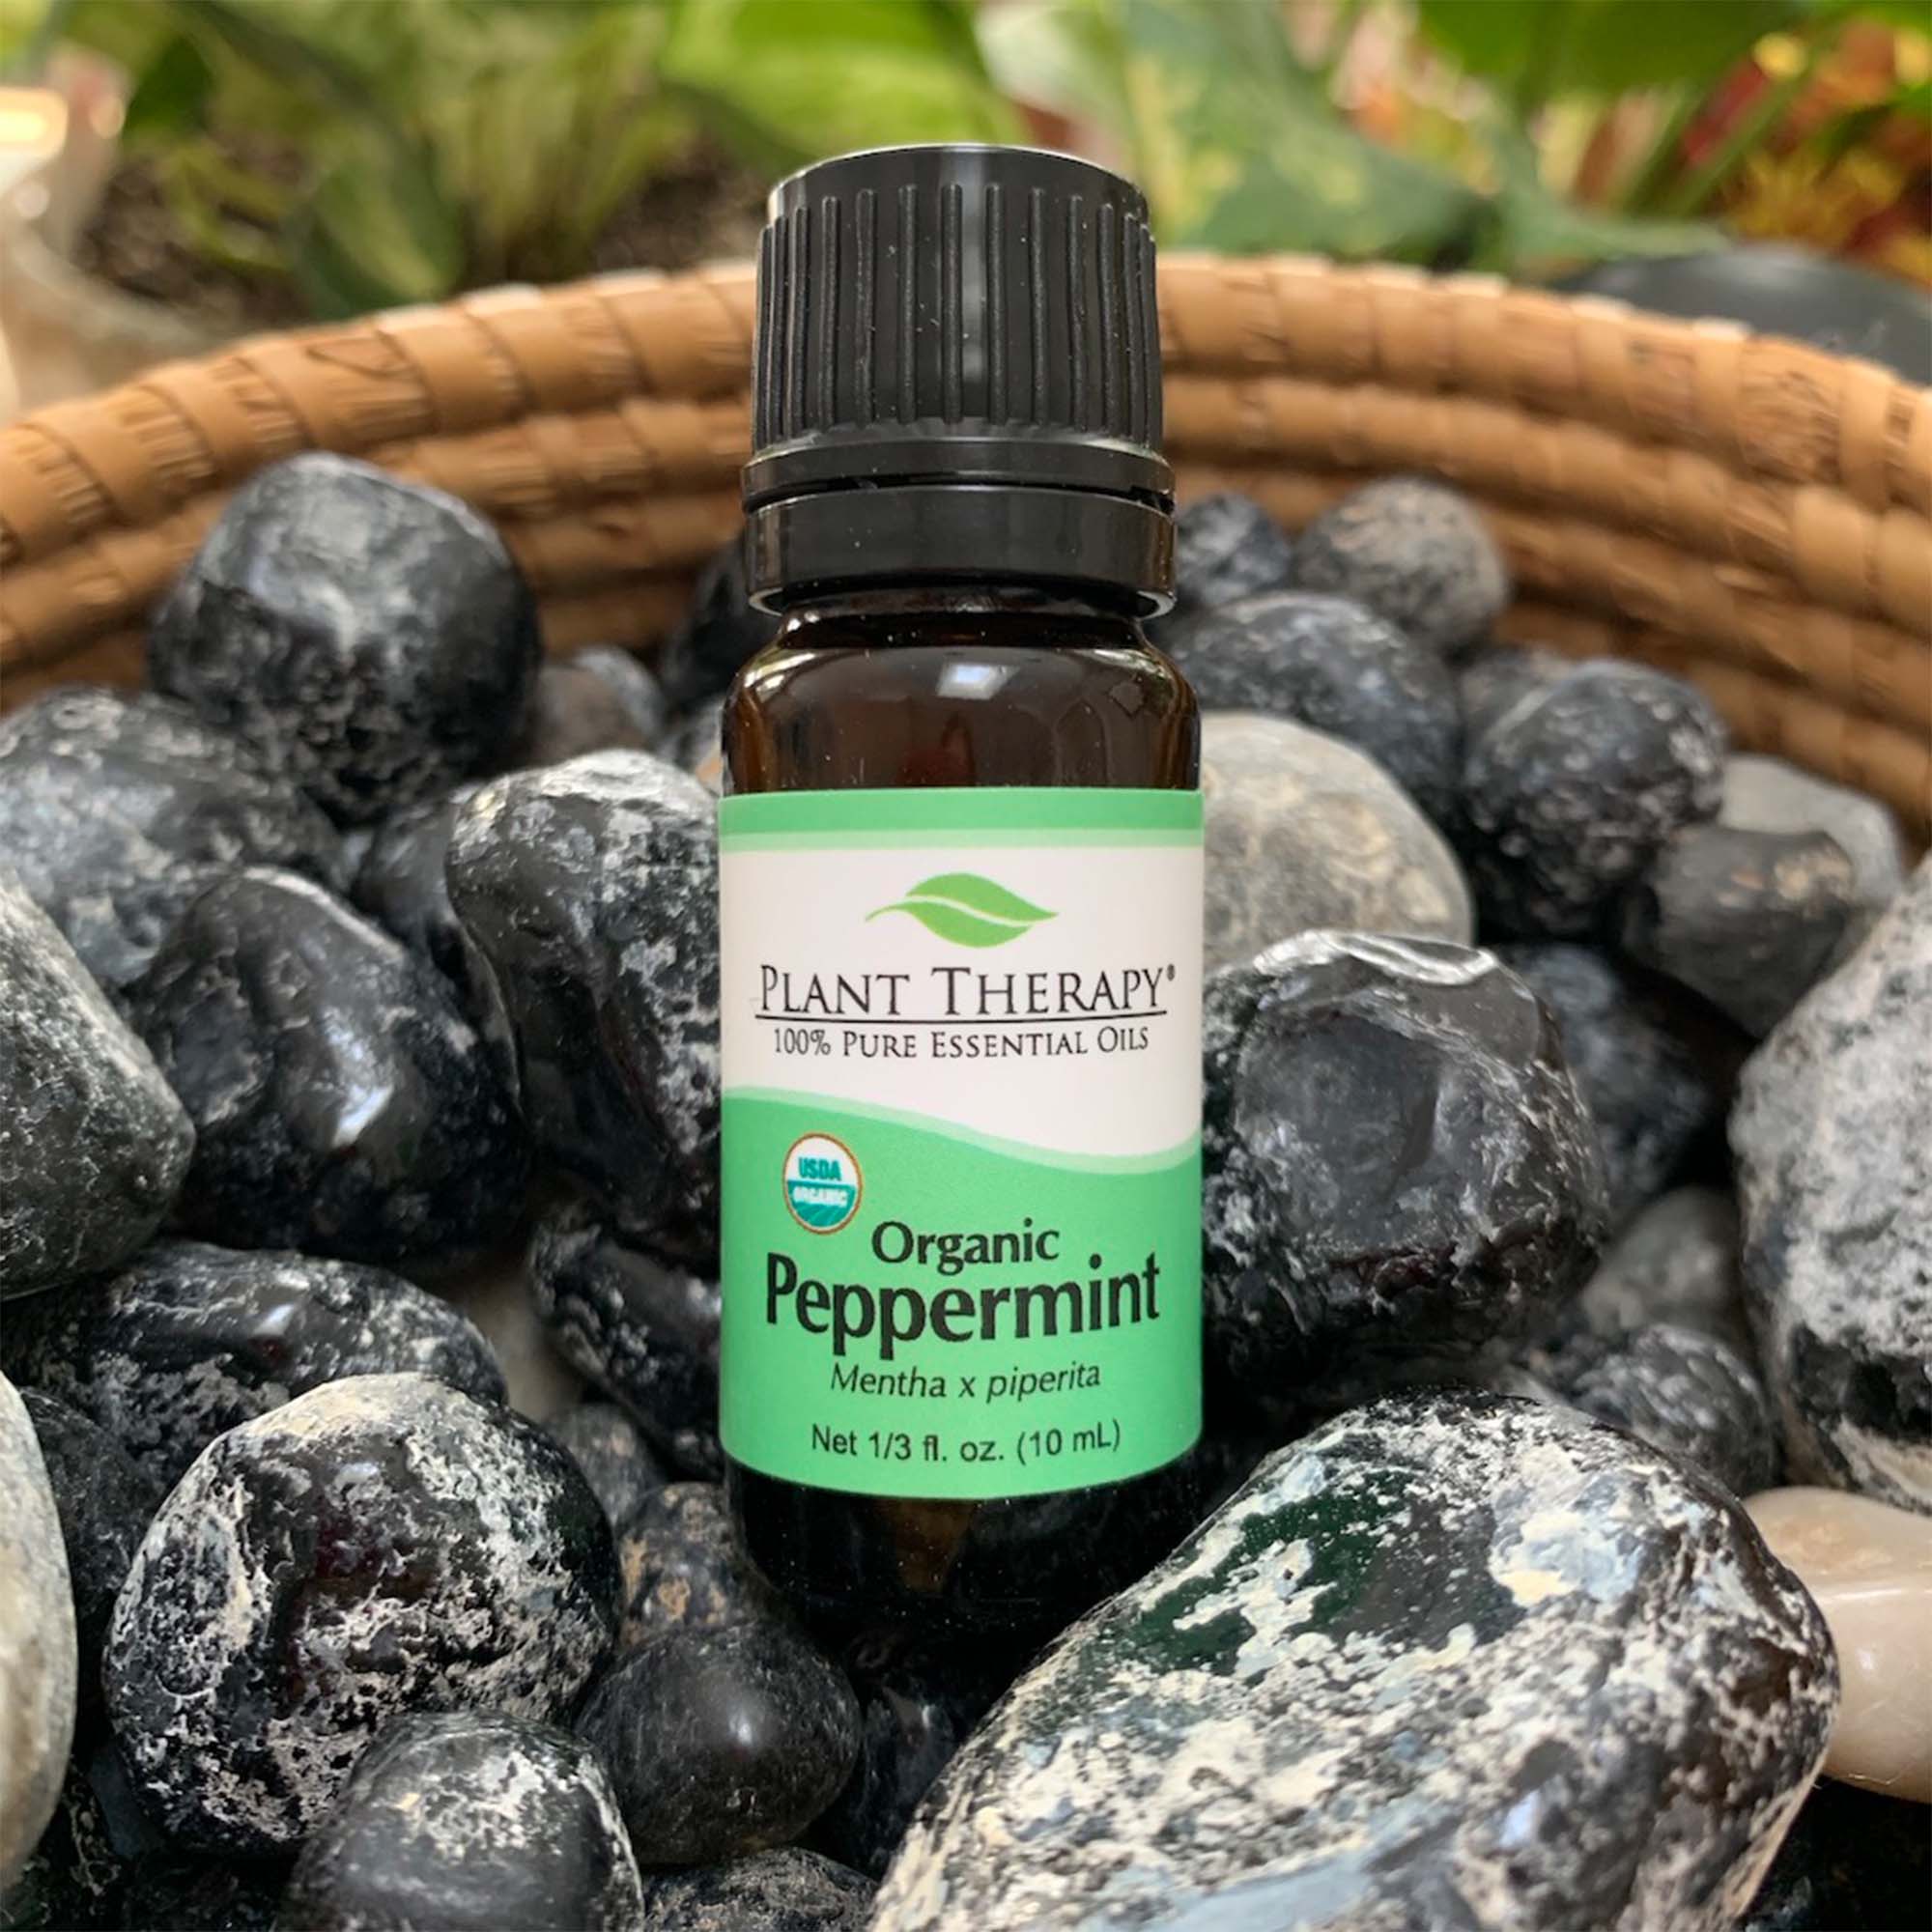 10 ml black bottle with green label. organic peppermint essential oil blend, displayed on assorted rocks